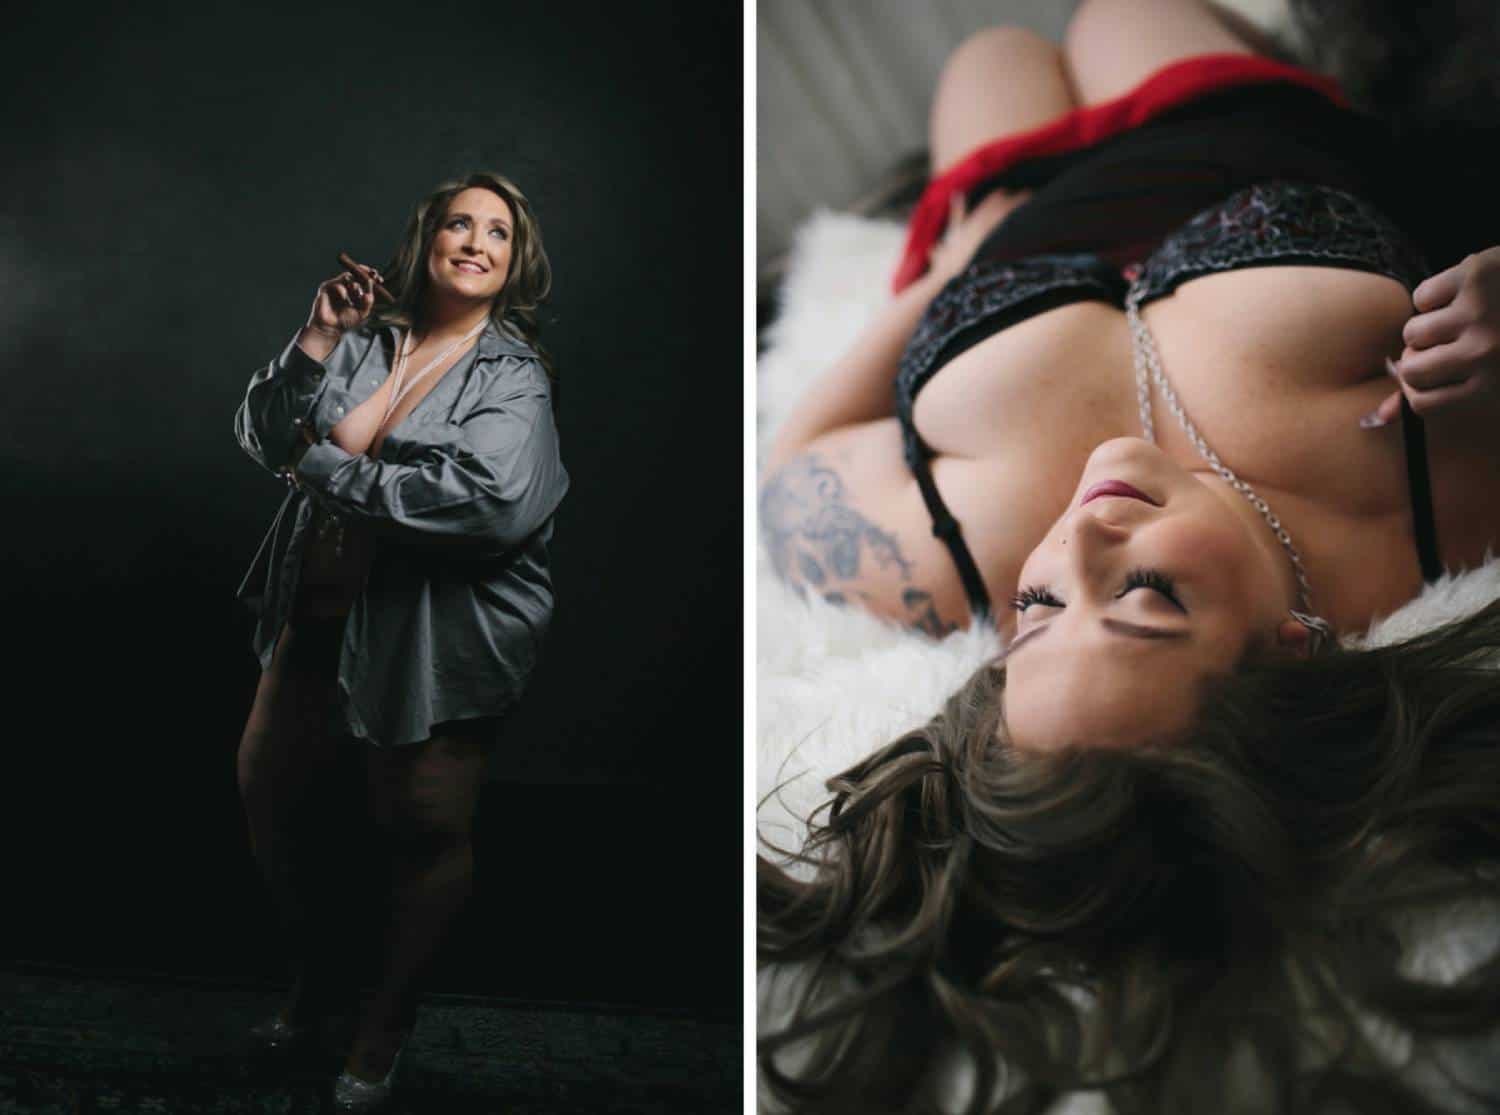 Two boudoir photos depict a woman with curly, dark blonde hair posed first in an oversized button-down shirt, then in black lingerie lying on a bed.